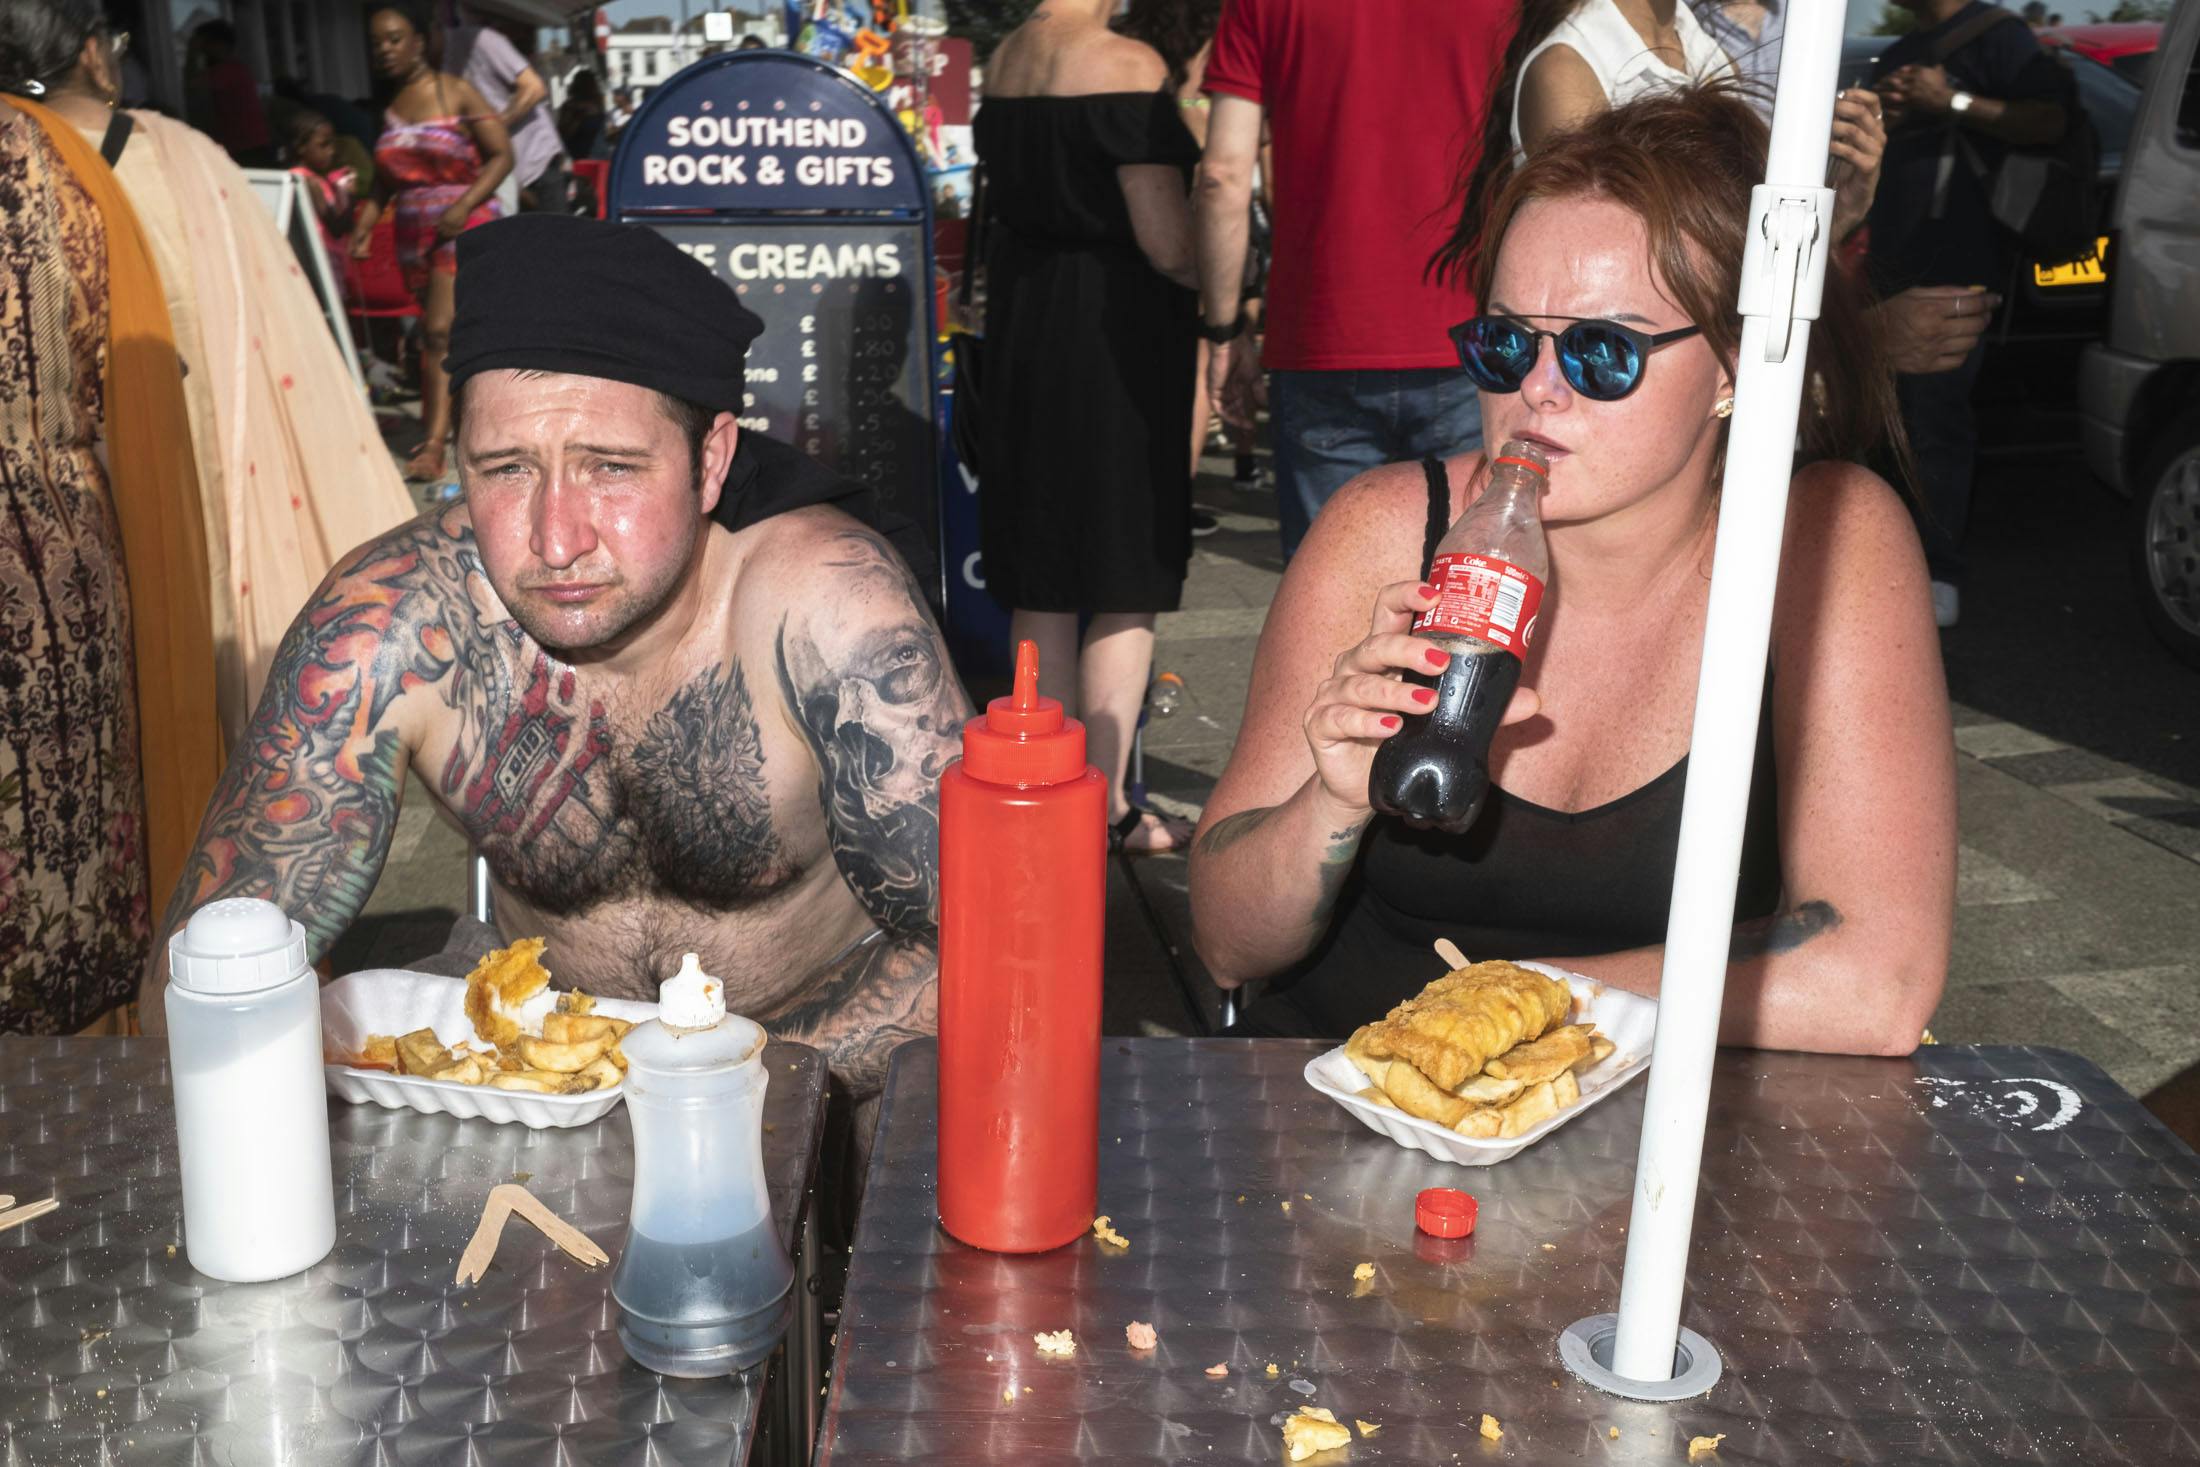 Man with tattoos and woman drinking coke eating fish and chips on Southend beach